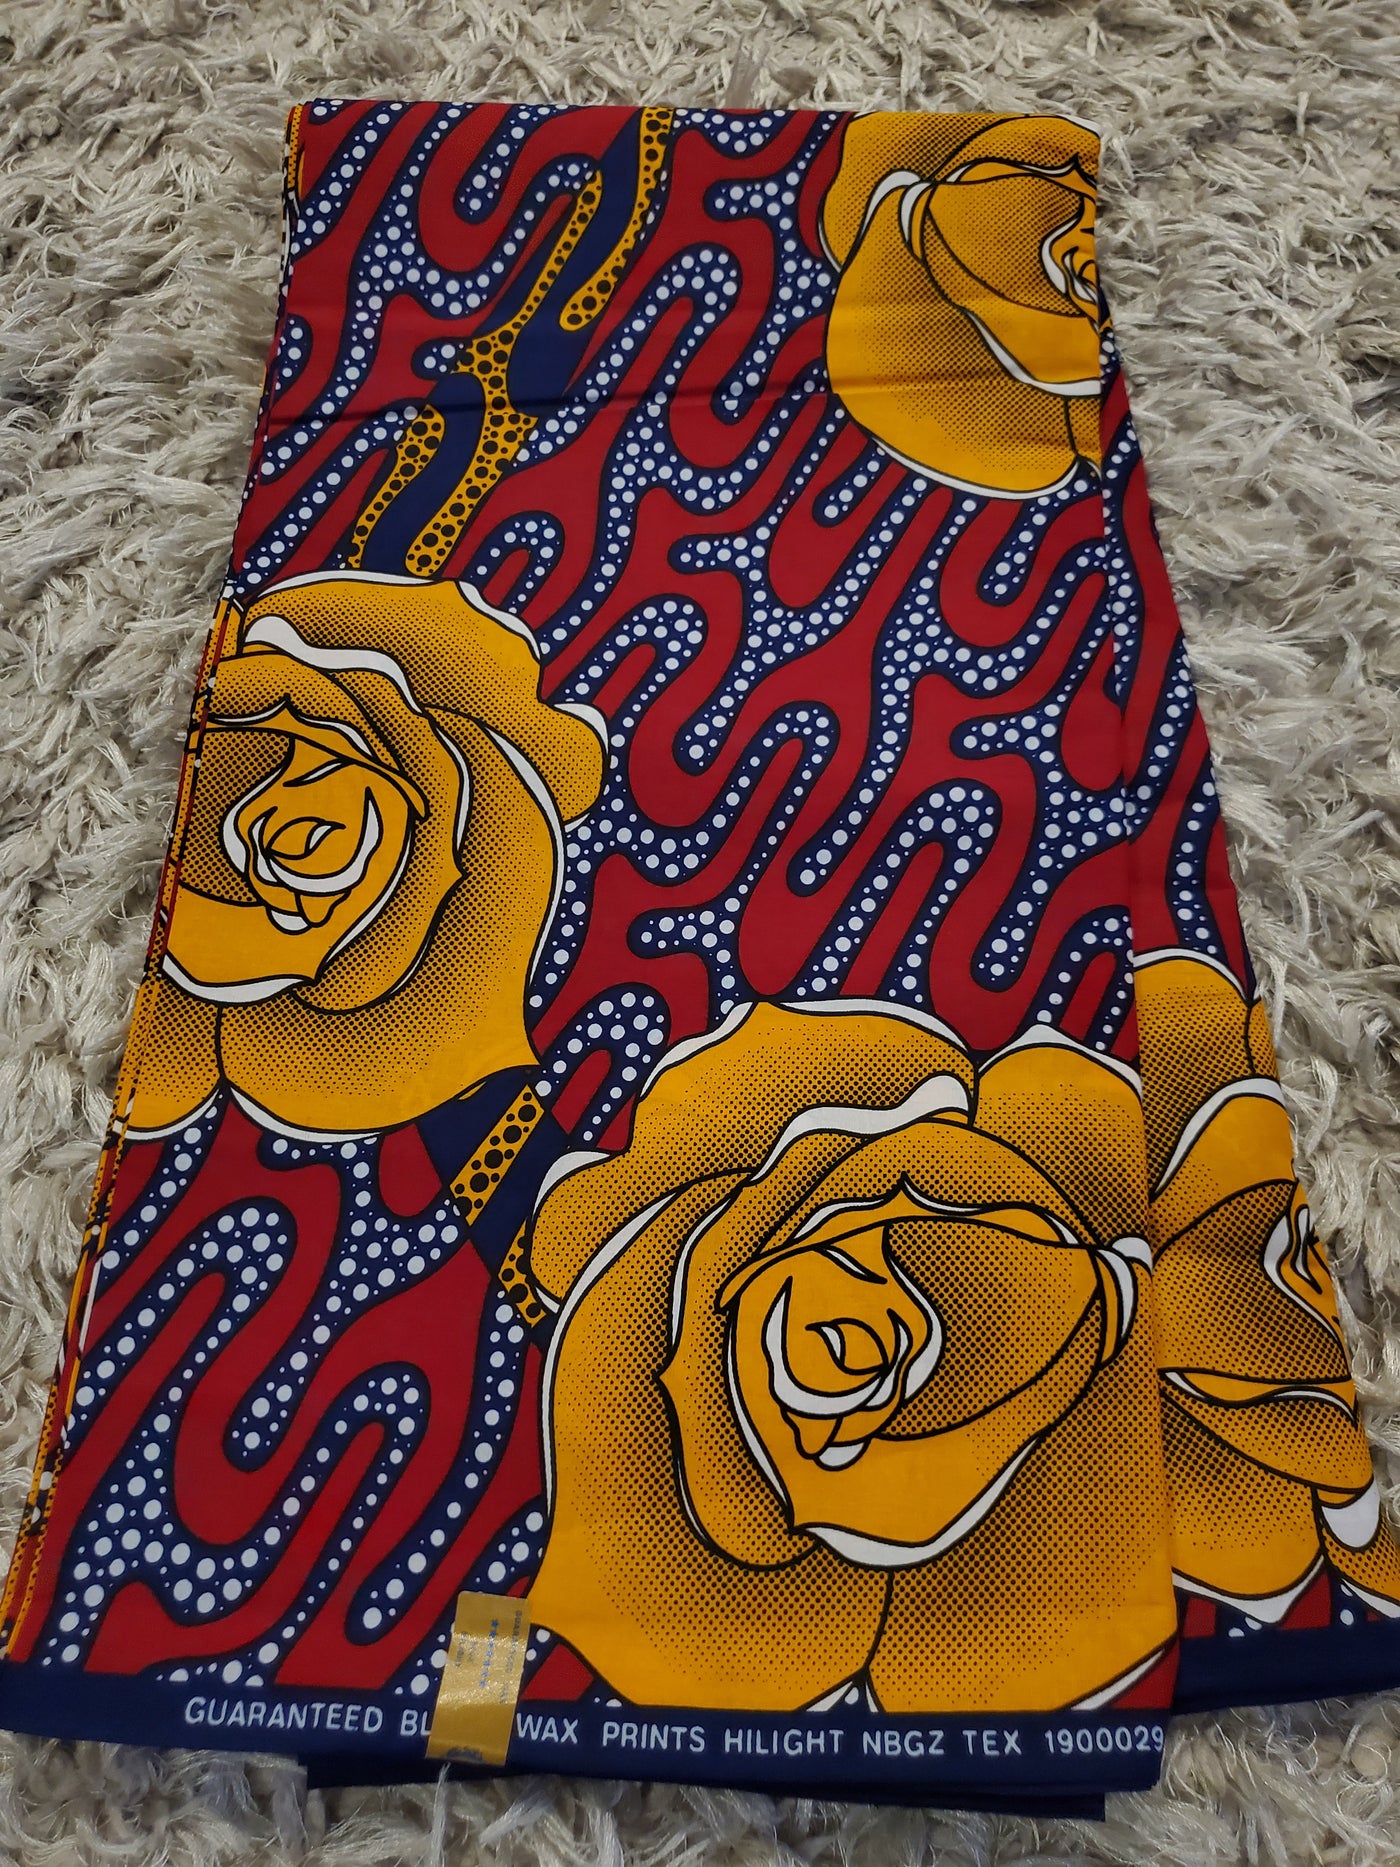 Red and Yellow Multicolor African Ankara Print Fabric